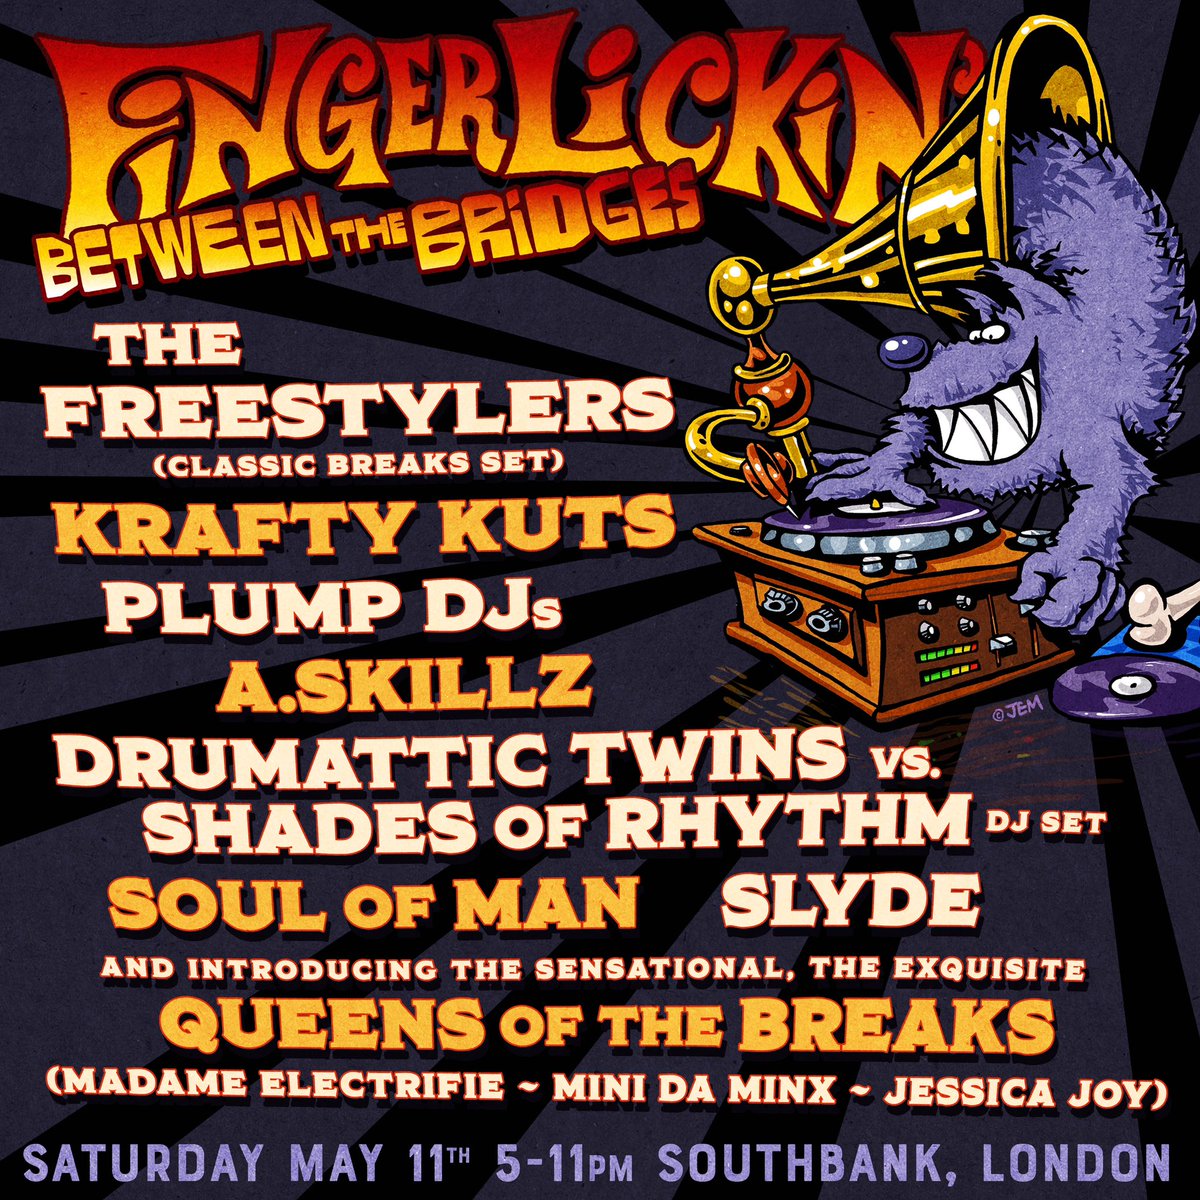 Another party in London happening , this time with the legendary Fingerlickin crew 11th May 5-11 PM 🙌🤩 skiddle.com/e/38199760